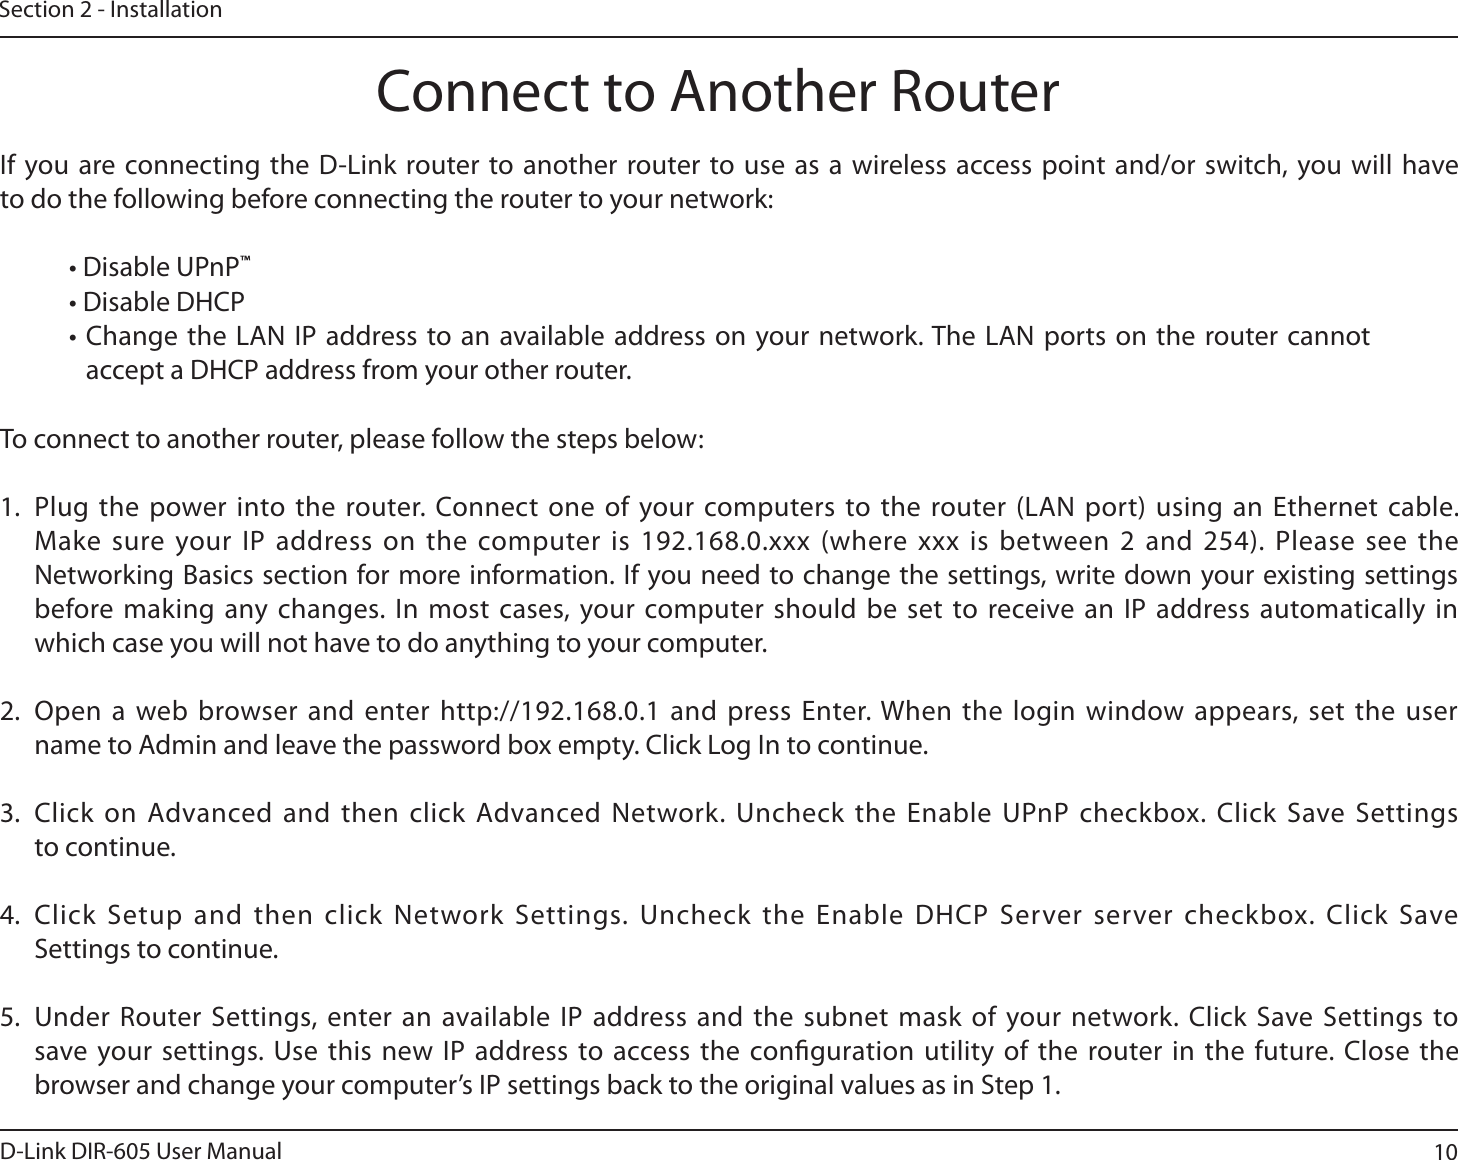 10D-Link DIR-605 User ManualSection 2 - InstallationIf you are connecting the D-Link router to another router to use as a wireless access point and/or switch, you will have to do the following before connecting the router to your network:t%JTBCMF61O1™t%JTBCMF%)$1t$IBOHFUIF -&quot;/*1BEESFTTUPBO BWBJMBCMFBEESFTTPOZPVSOFUXPSL5IF-&quot;/QPSUTPOUIF SPVUFSDBOOPUaccept a DHCP address from your other router.To connect to another router, please follow the steps below:1. Plug the power into the router. Connect one of your computers to the router (LAN port) using an Ethernet cable. Make sure your IP address on the computer is 192.168.0.xxx (where xxx is between 2 and 254). Please see the Networking Basics section for more information. If you need to change the settings, write down your existing settings before making any changes. In most cases, your computer should be set to receive an IP address automatically in which case you will not have to do anything to your computer.2. Open a web browser and enter http://192.168.0.1 and press Enter. When the login window appears, set the user name to Admin and leave the password box empty. Click Log In to continue.3. Click on Advanced and then click Advanced Network. Uncheck the Enable UPnP checkbox. Click Save Settingsto continue. 4. Click Setup and then click Network Settings. Uncheck the Enable DHCP Server server checkbox. Click Save Settings to continue.5. Under Router Settings, enter an available IP address and the subnet mask of your network. Click Save Settings to save your settings. Use this new IP address to access the conguration utility of the router in the future. Close the browser and change your computer’s IP settings back to the original values as in Step 1.Connect to Another Router